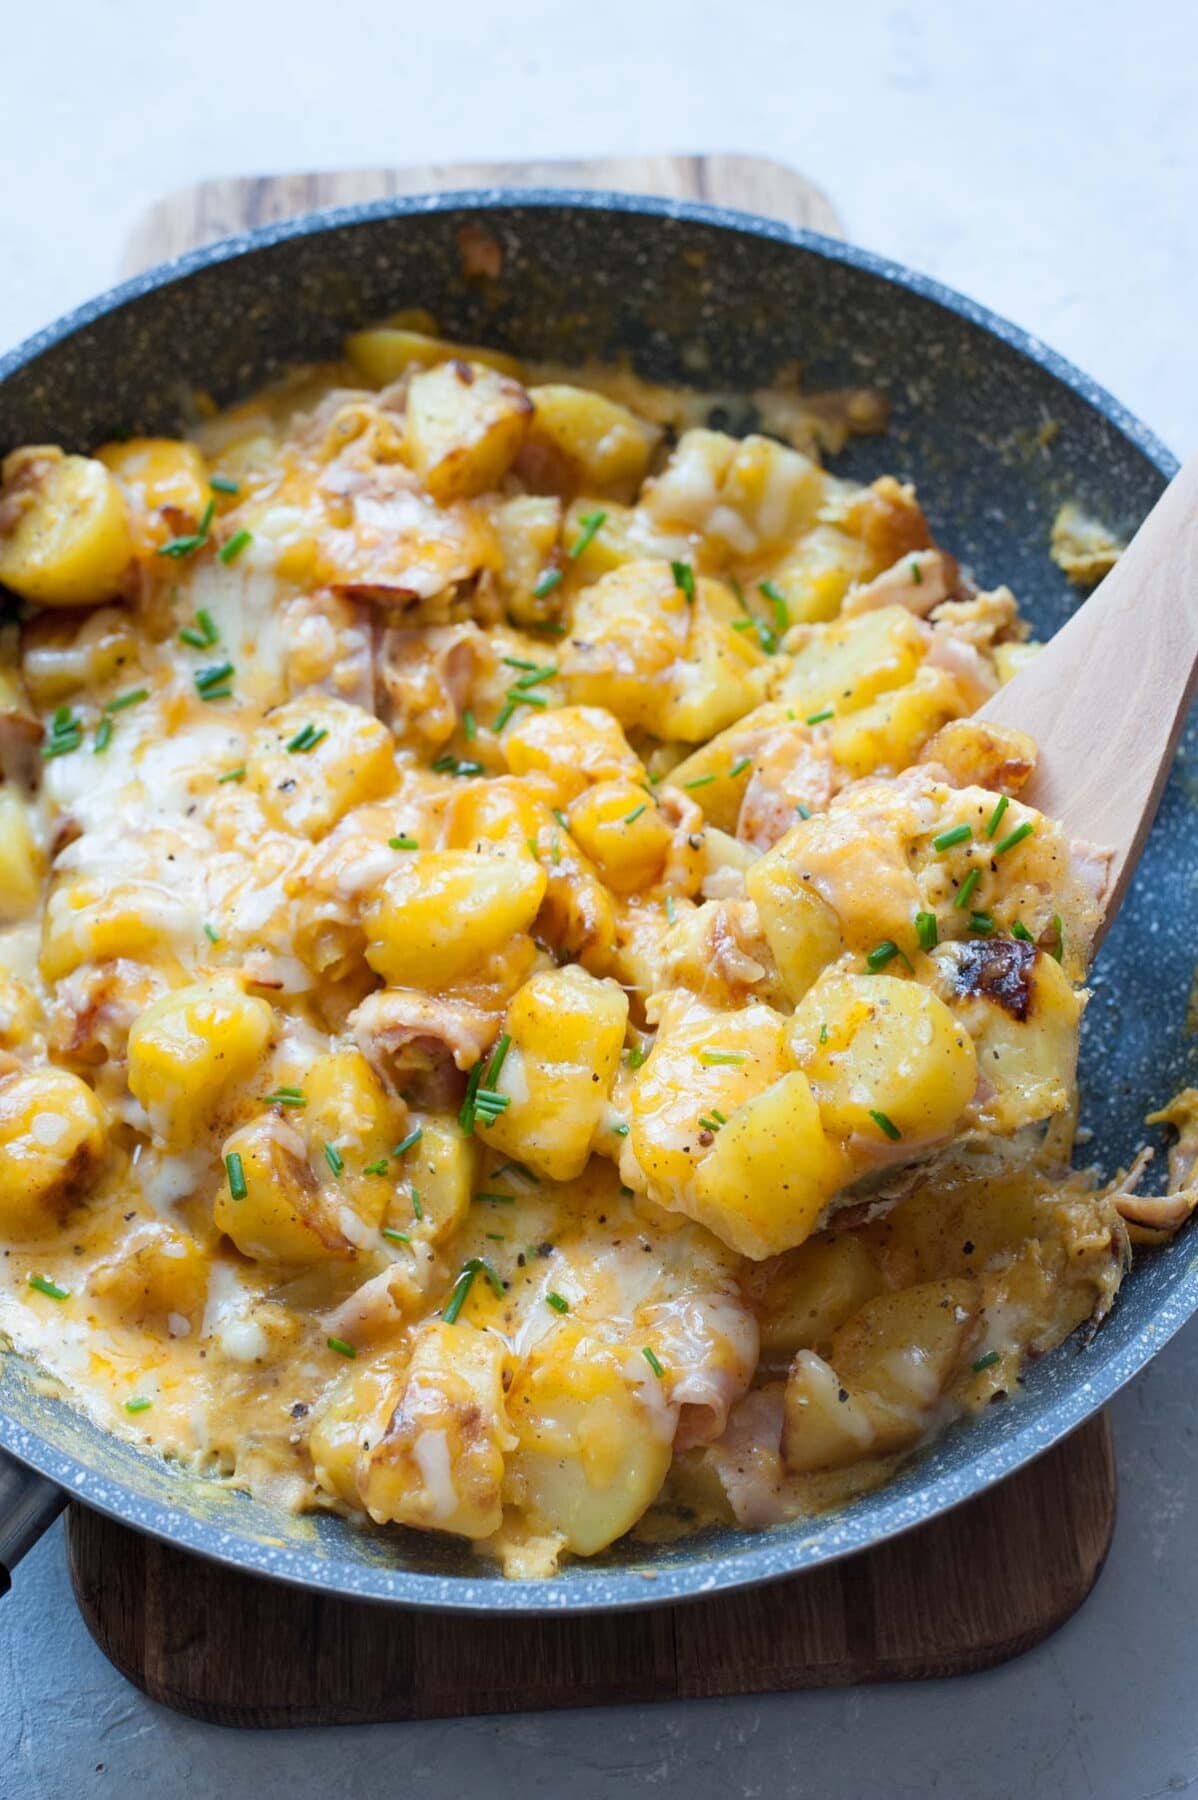 Potato egg scramble topped with melted cheese and chives in a grey pan.